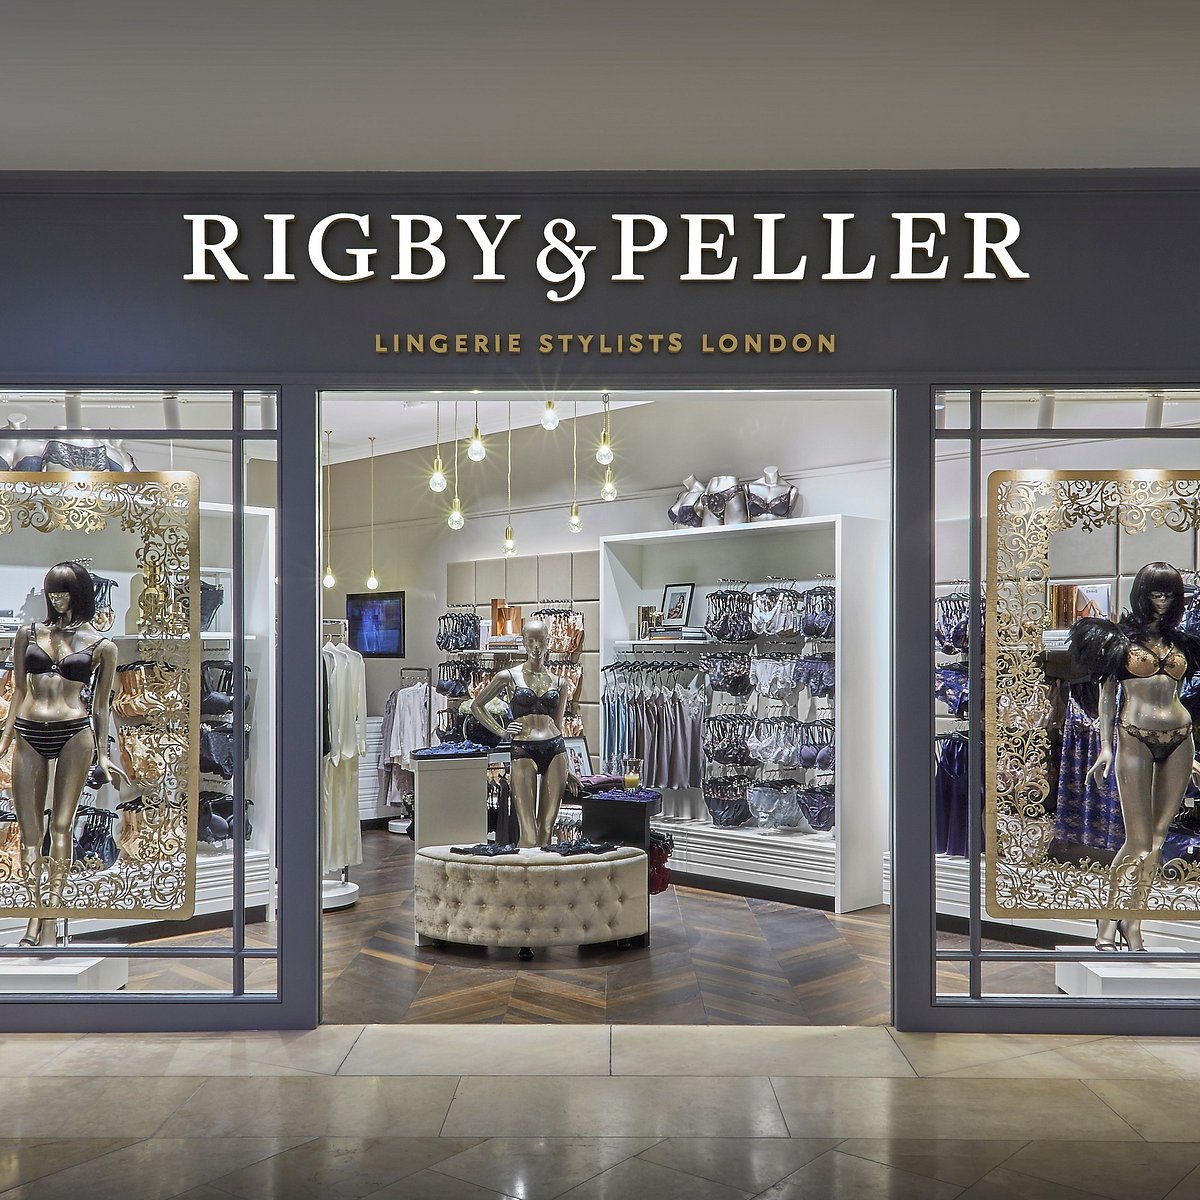 RIGBY & PELLER: All You Need to Know BEFORE You Go (with Photos)